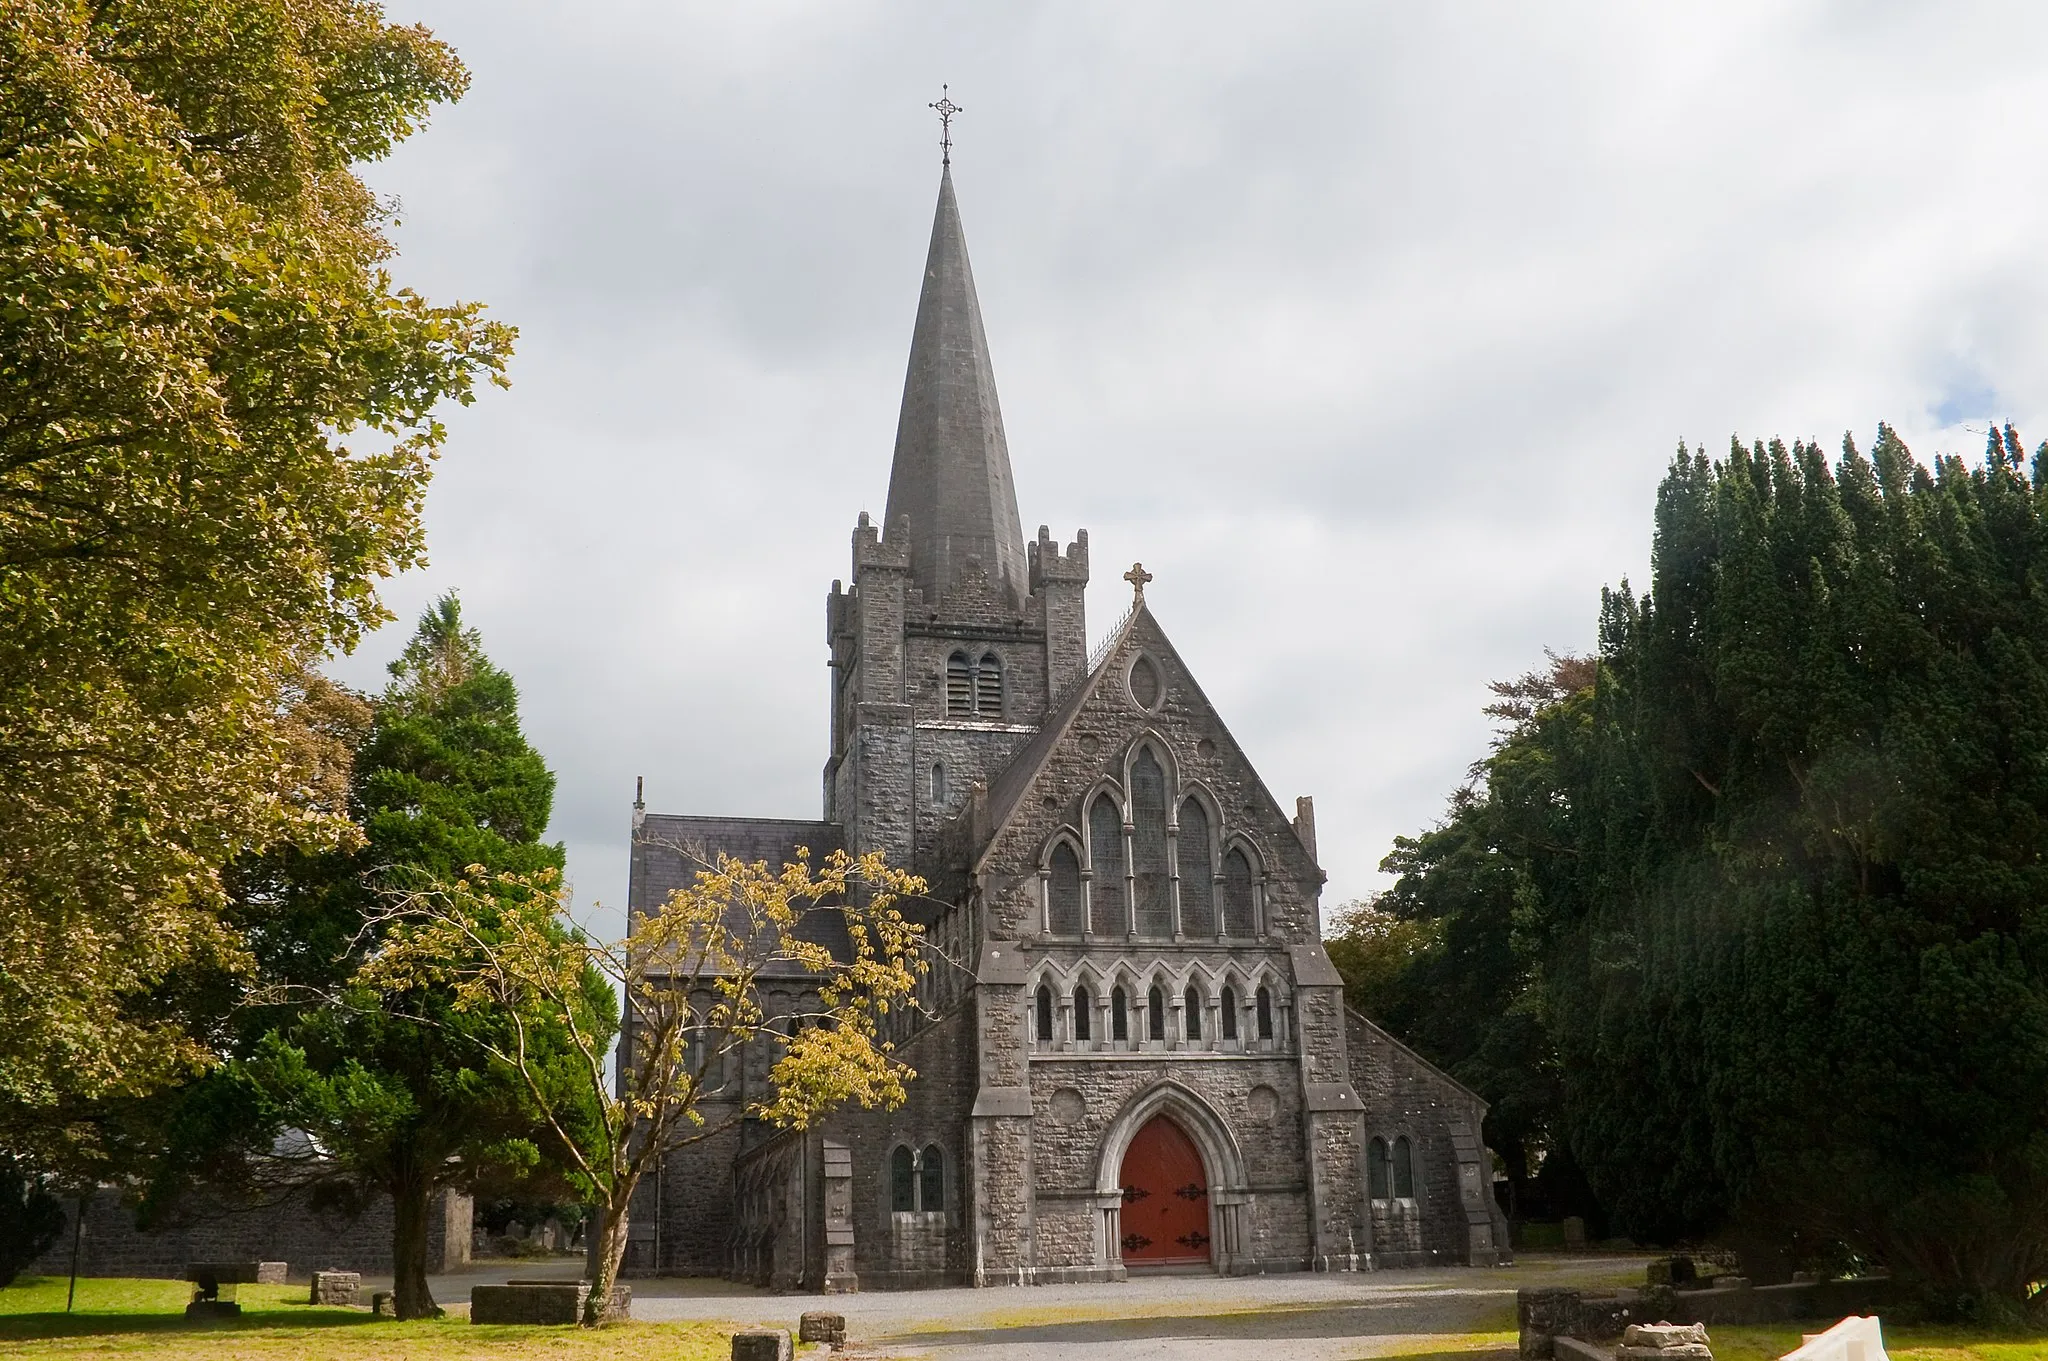 Photo showing: Tuam, County Galway, Ireland

West front of St. Mary's Cathedral in Tuam, designed by Sir Thomas Deane.